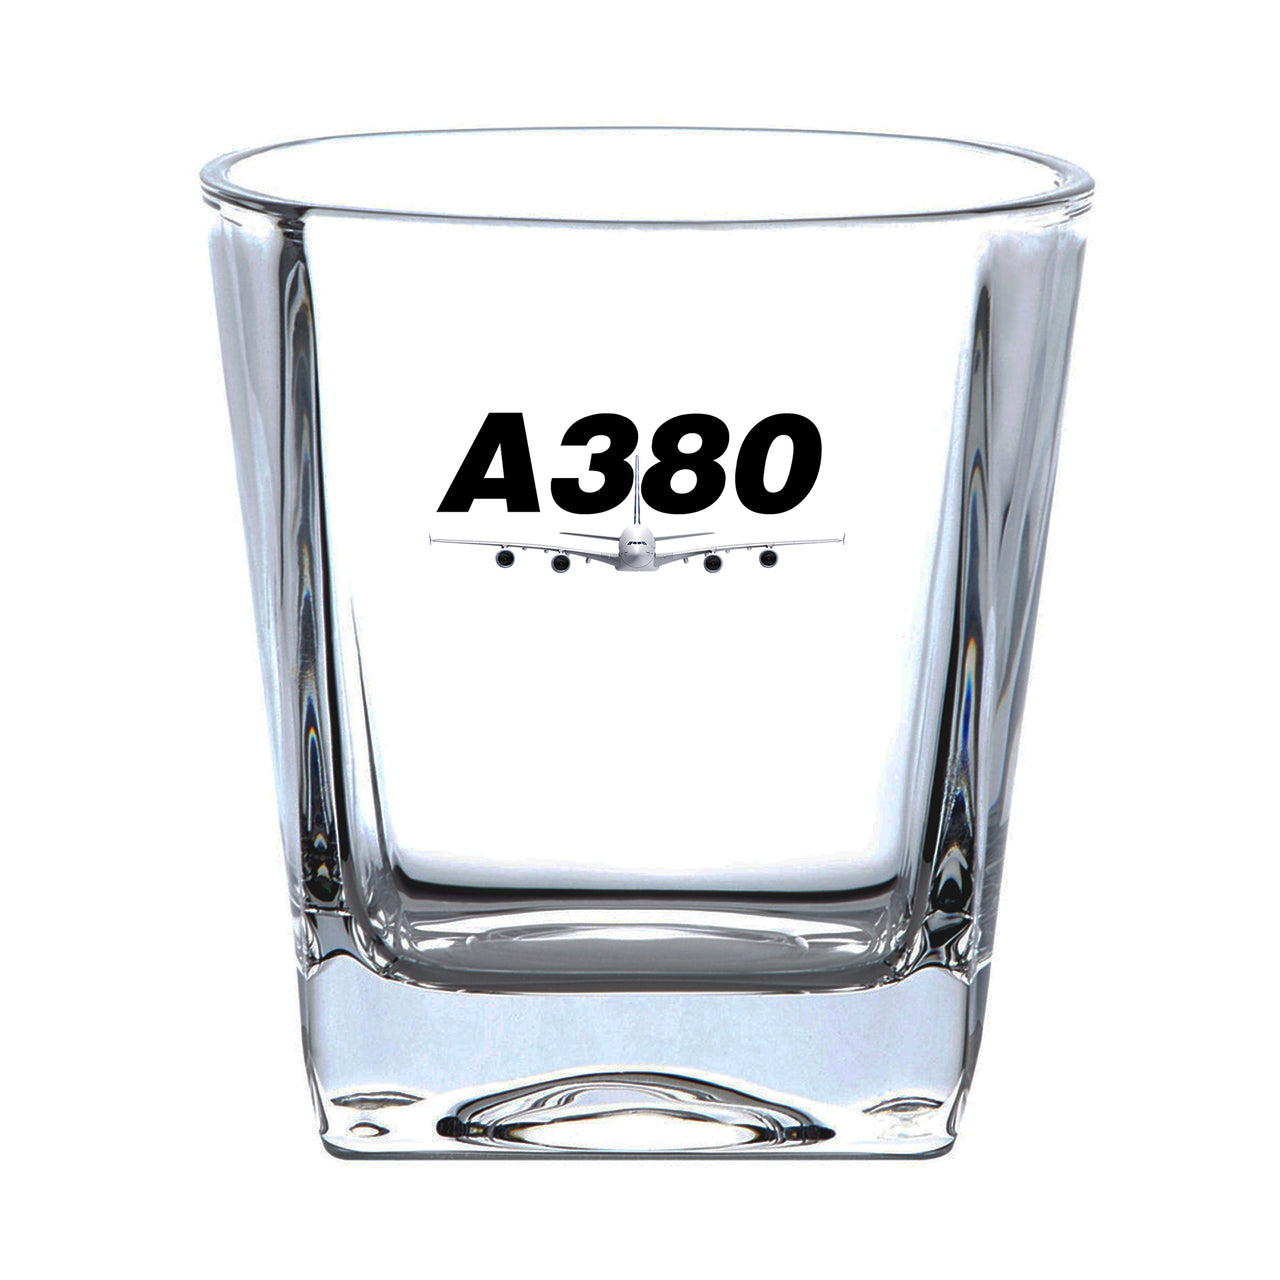 Super Airbus A380 Designed Whiskey Glass